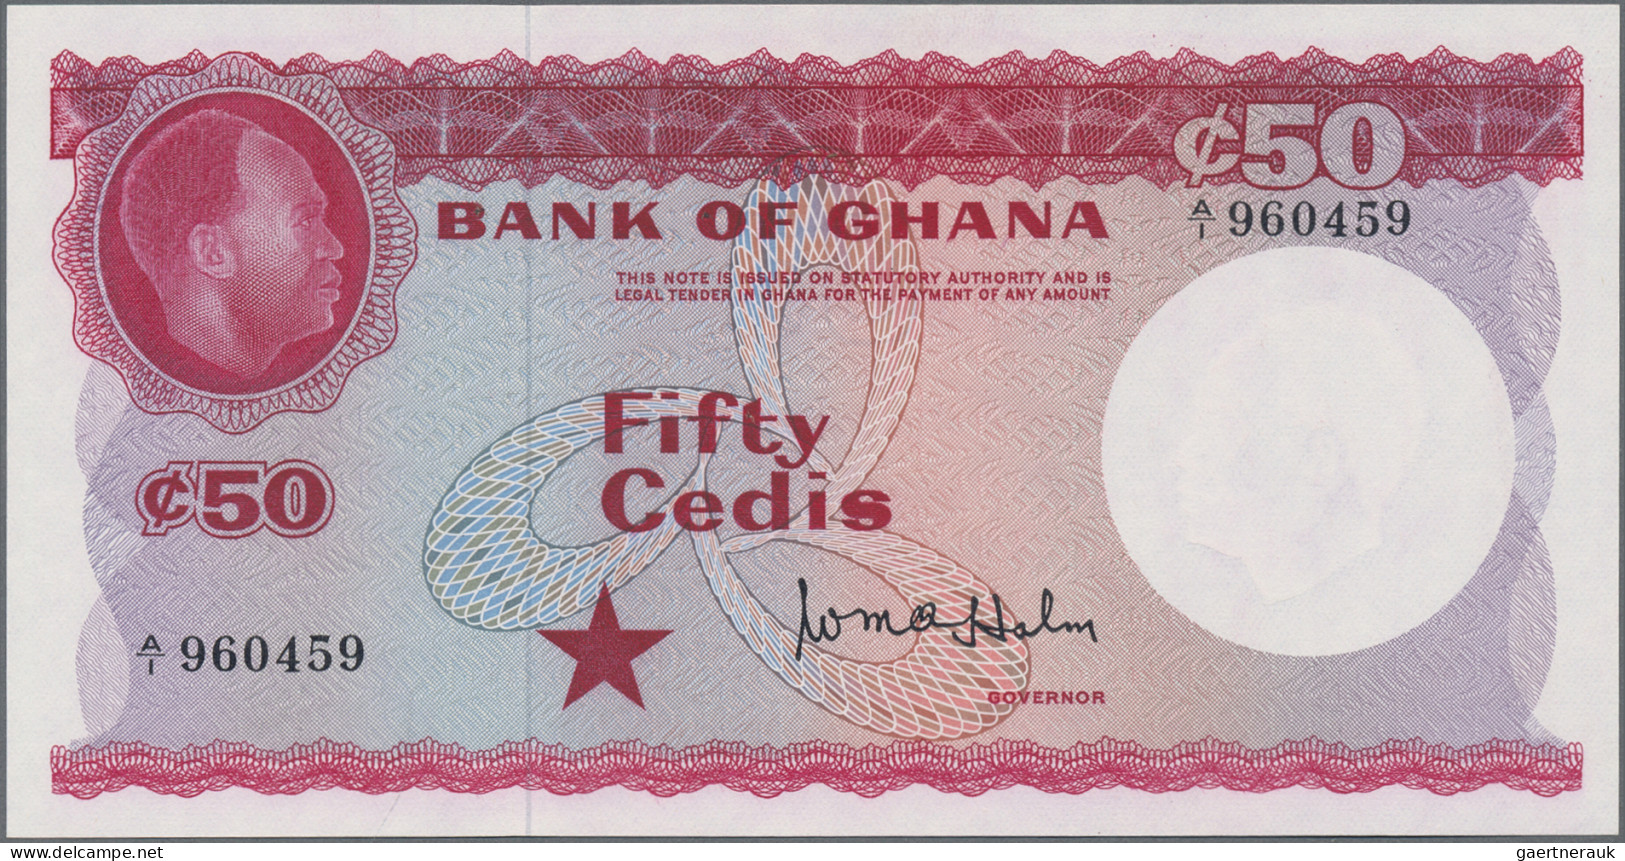 Ghana: Bank of Ghana, lot with 5 banknotes, series ND(1965), with 1, 5, 10, 50 a